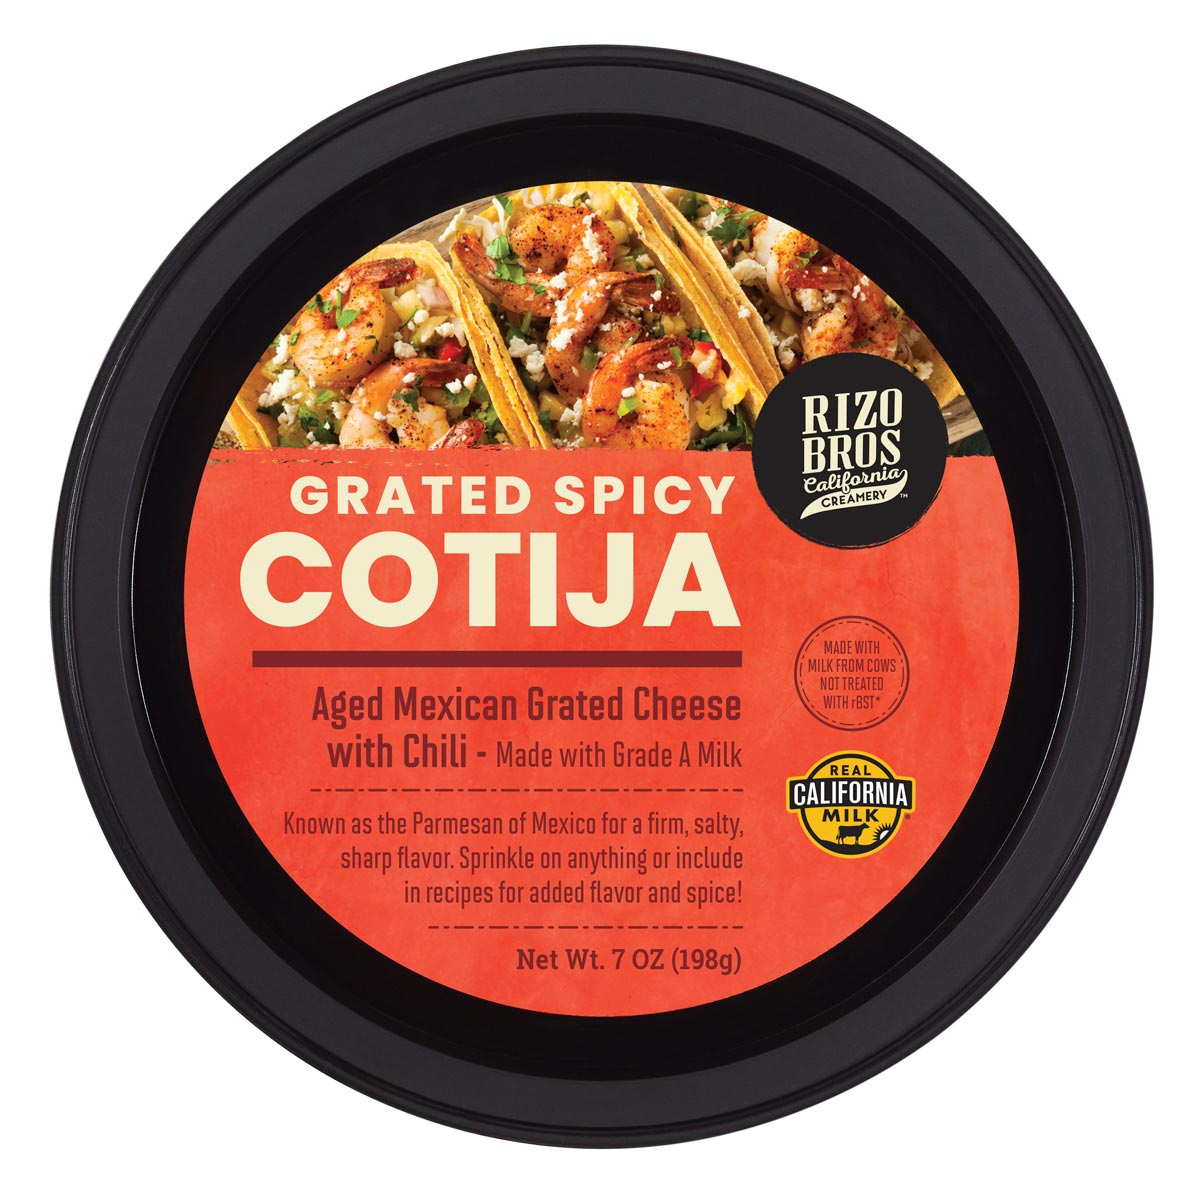 Grated Spicy Cotija Packaging